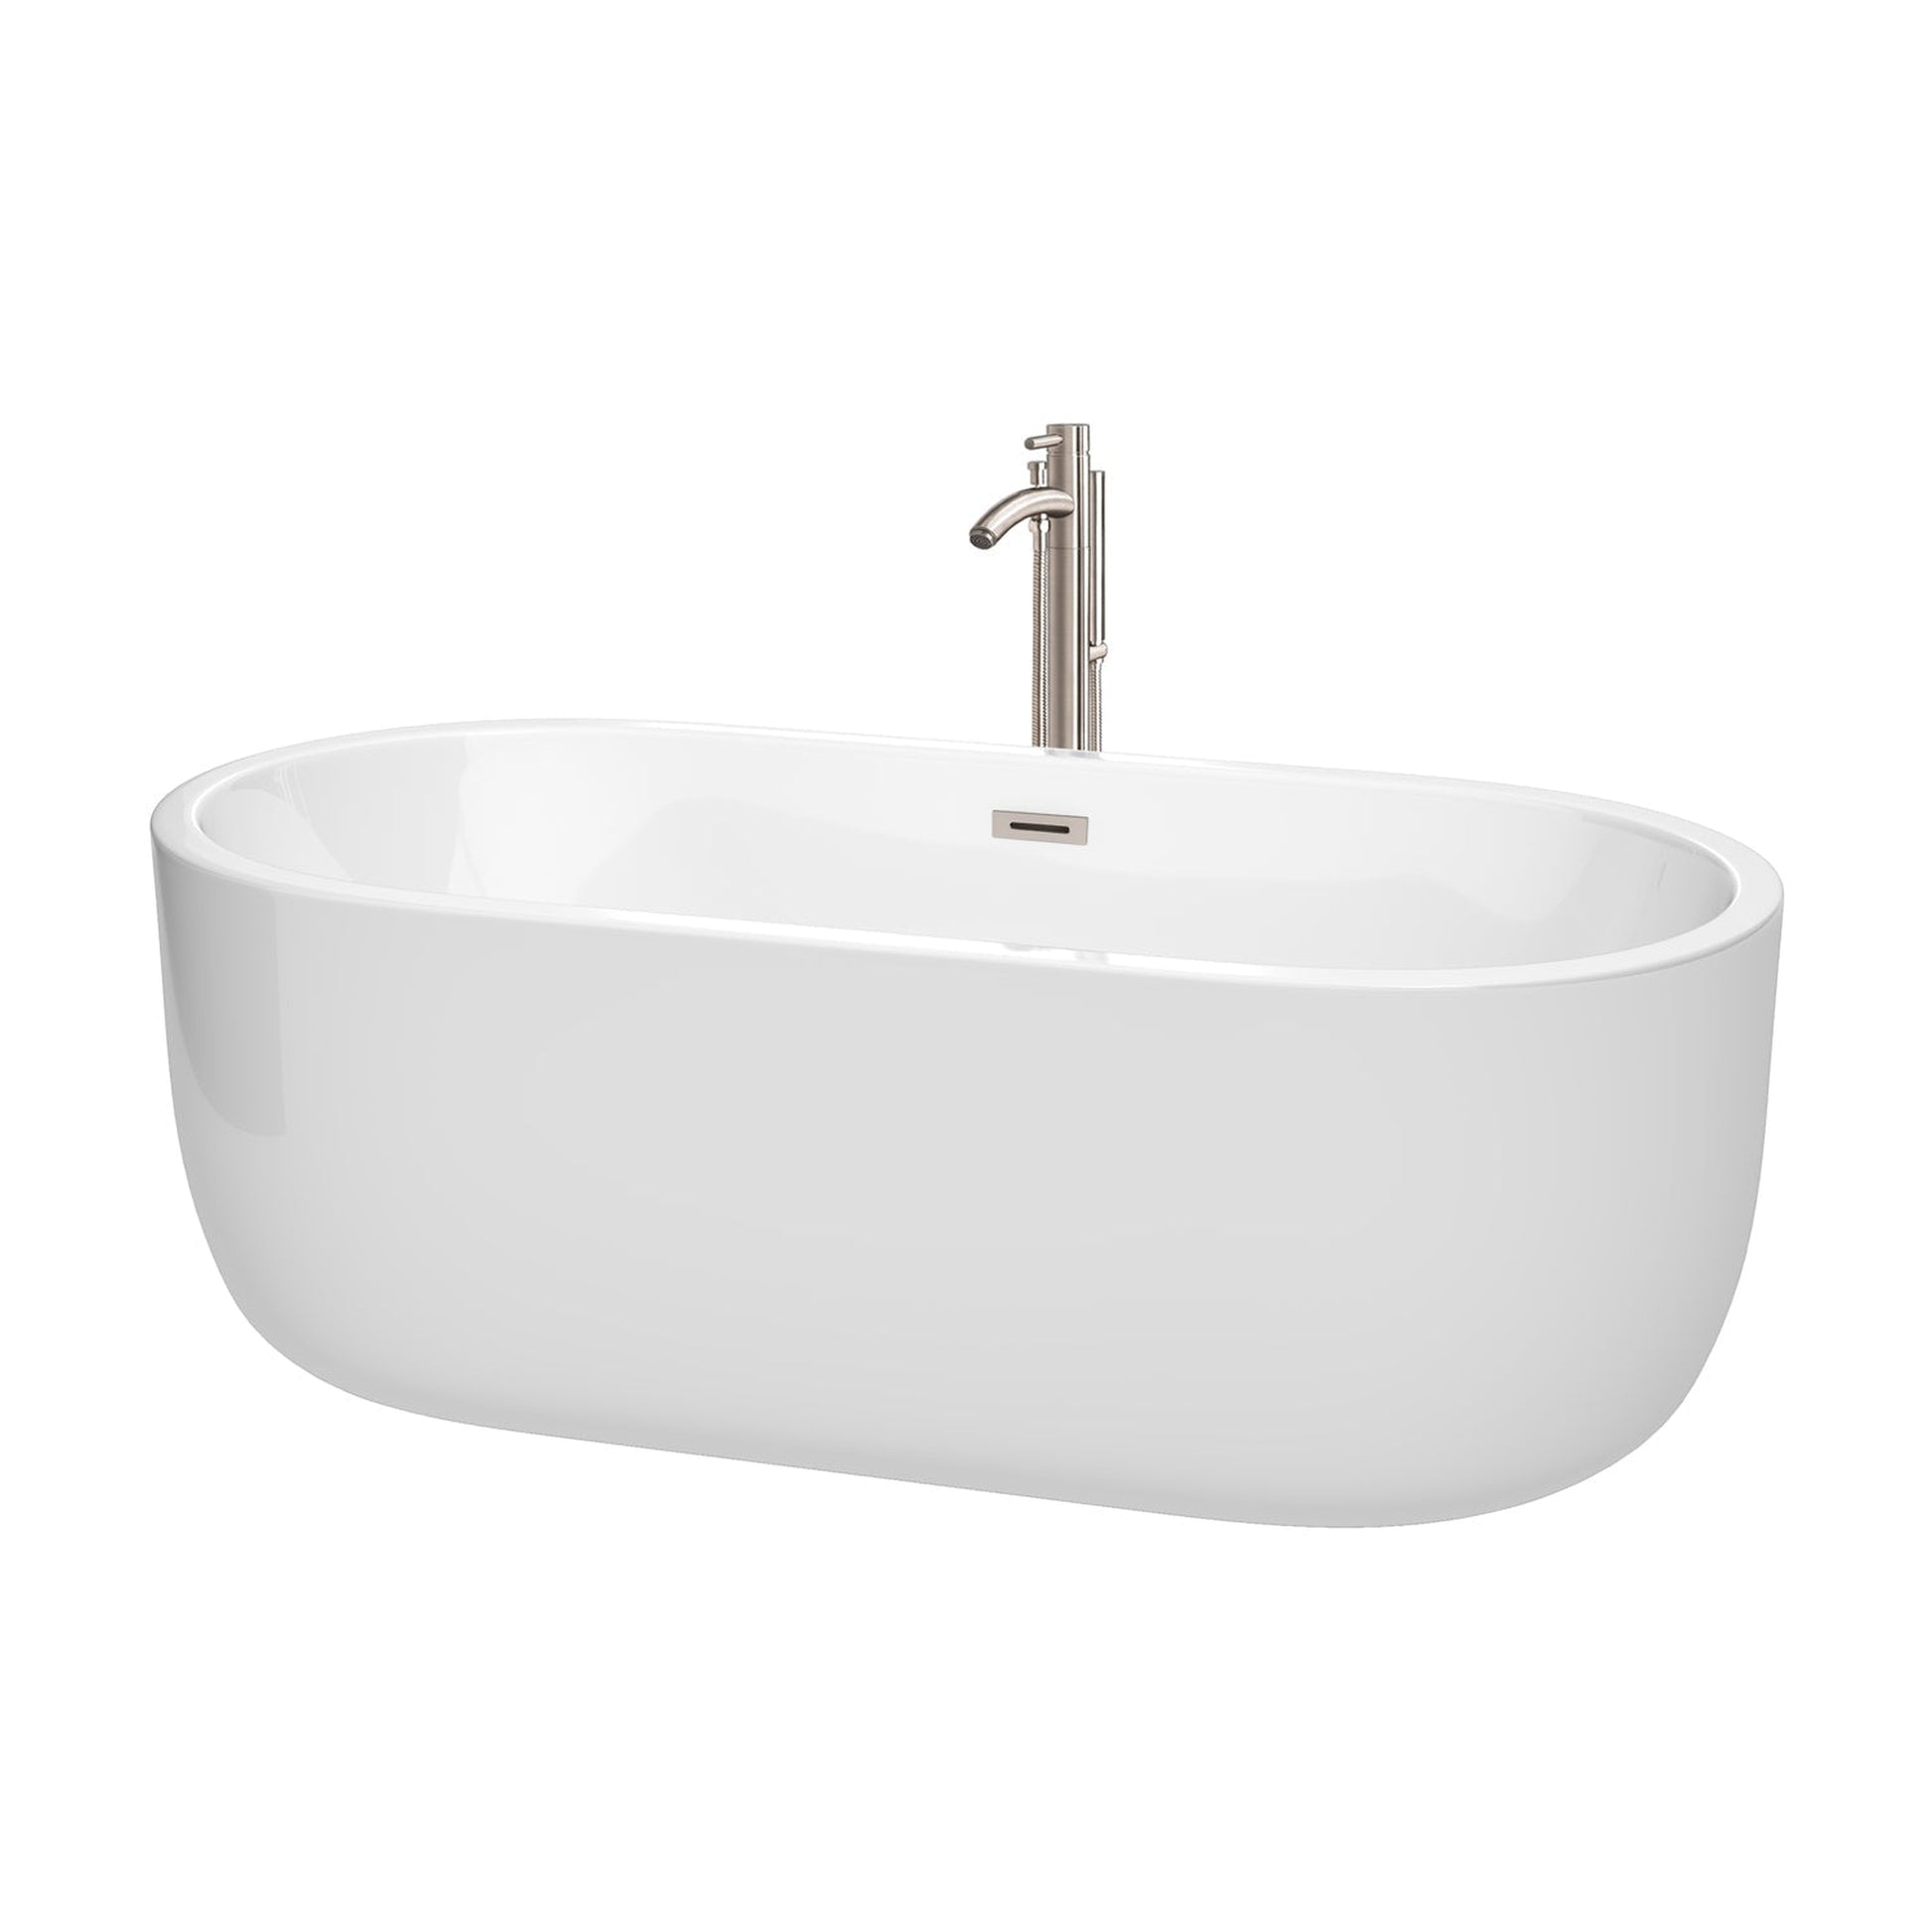 Wyndham Collection Juliette 67" Freestanding Bathtub in White With Floor Mounted Faucet, Drain and Overflow Trim in Brushed Nickel